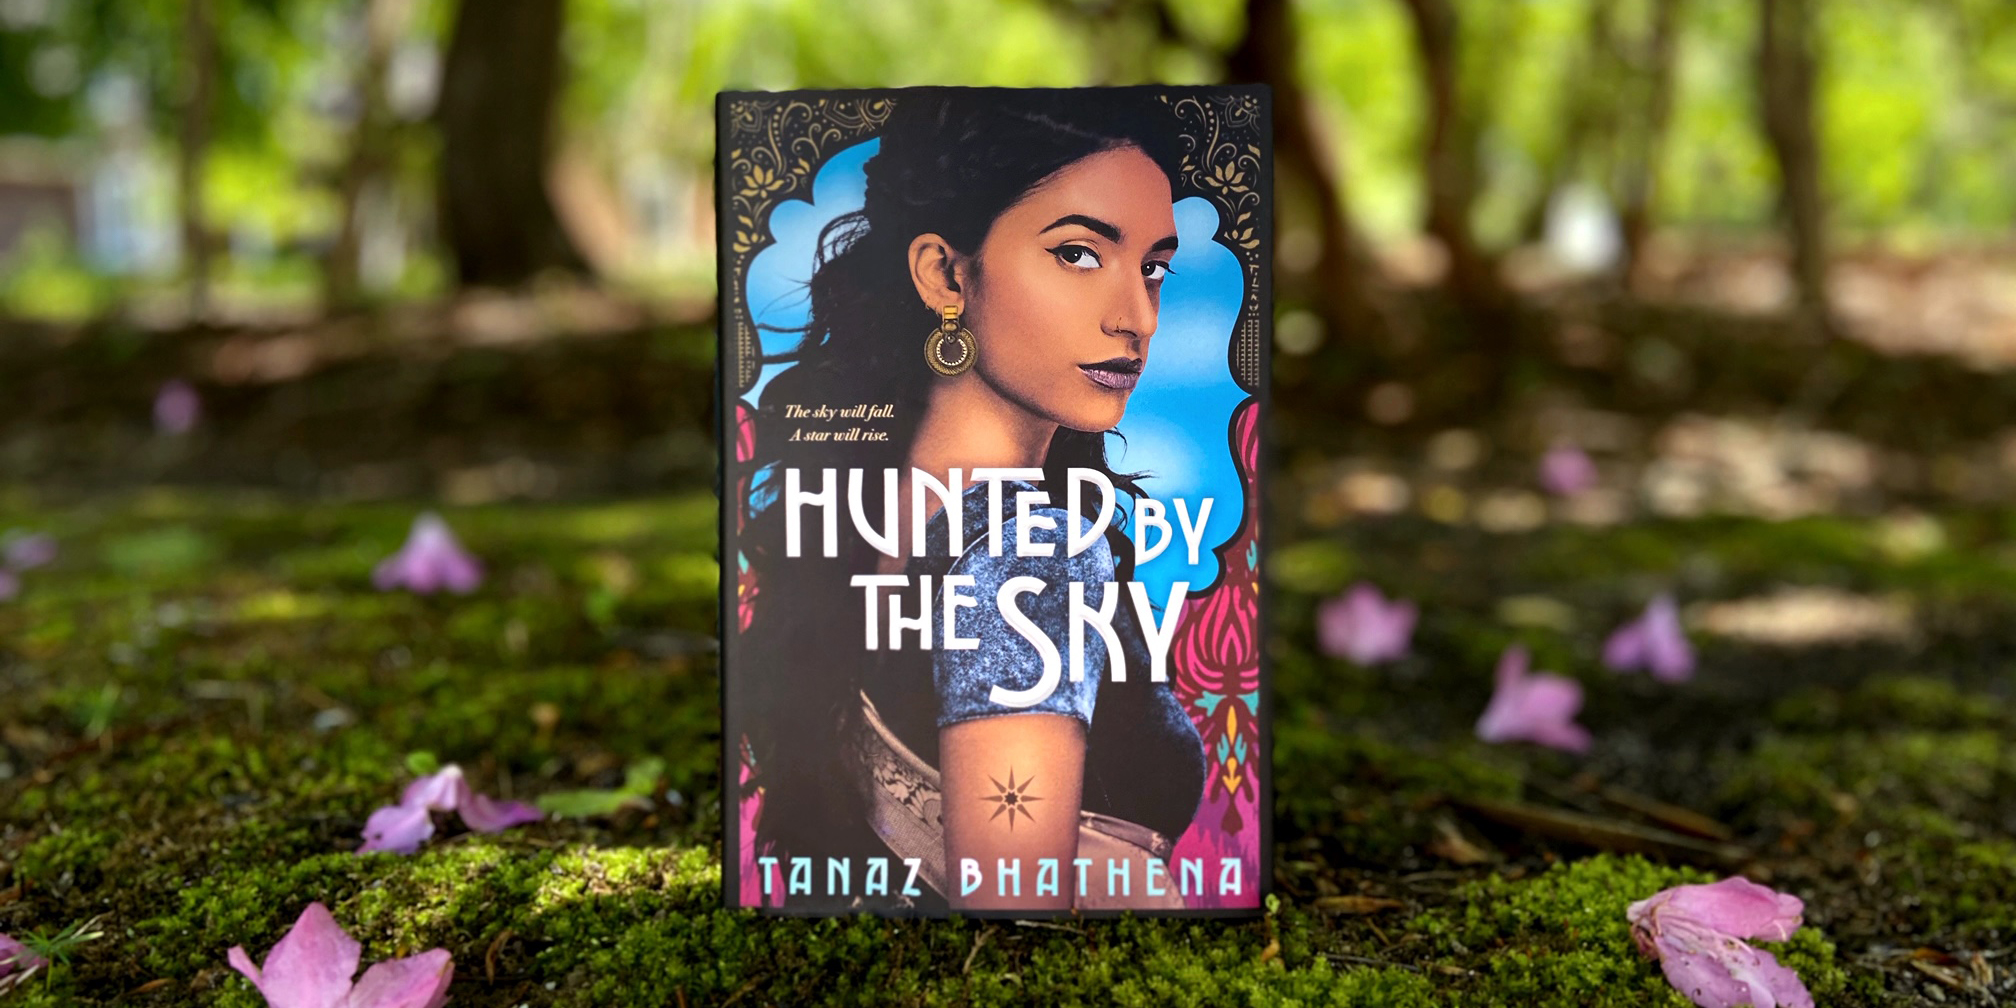 An Interview with Tanaz Bhathena, Author of Hunted by the Sky